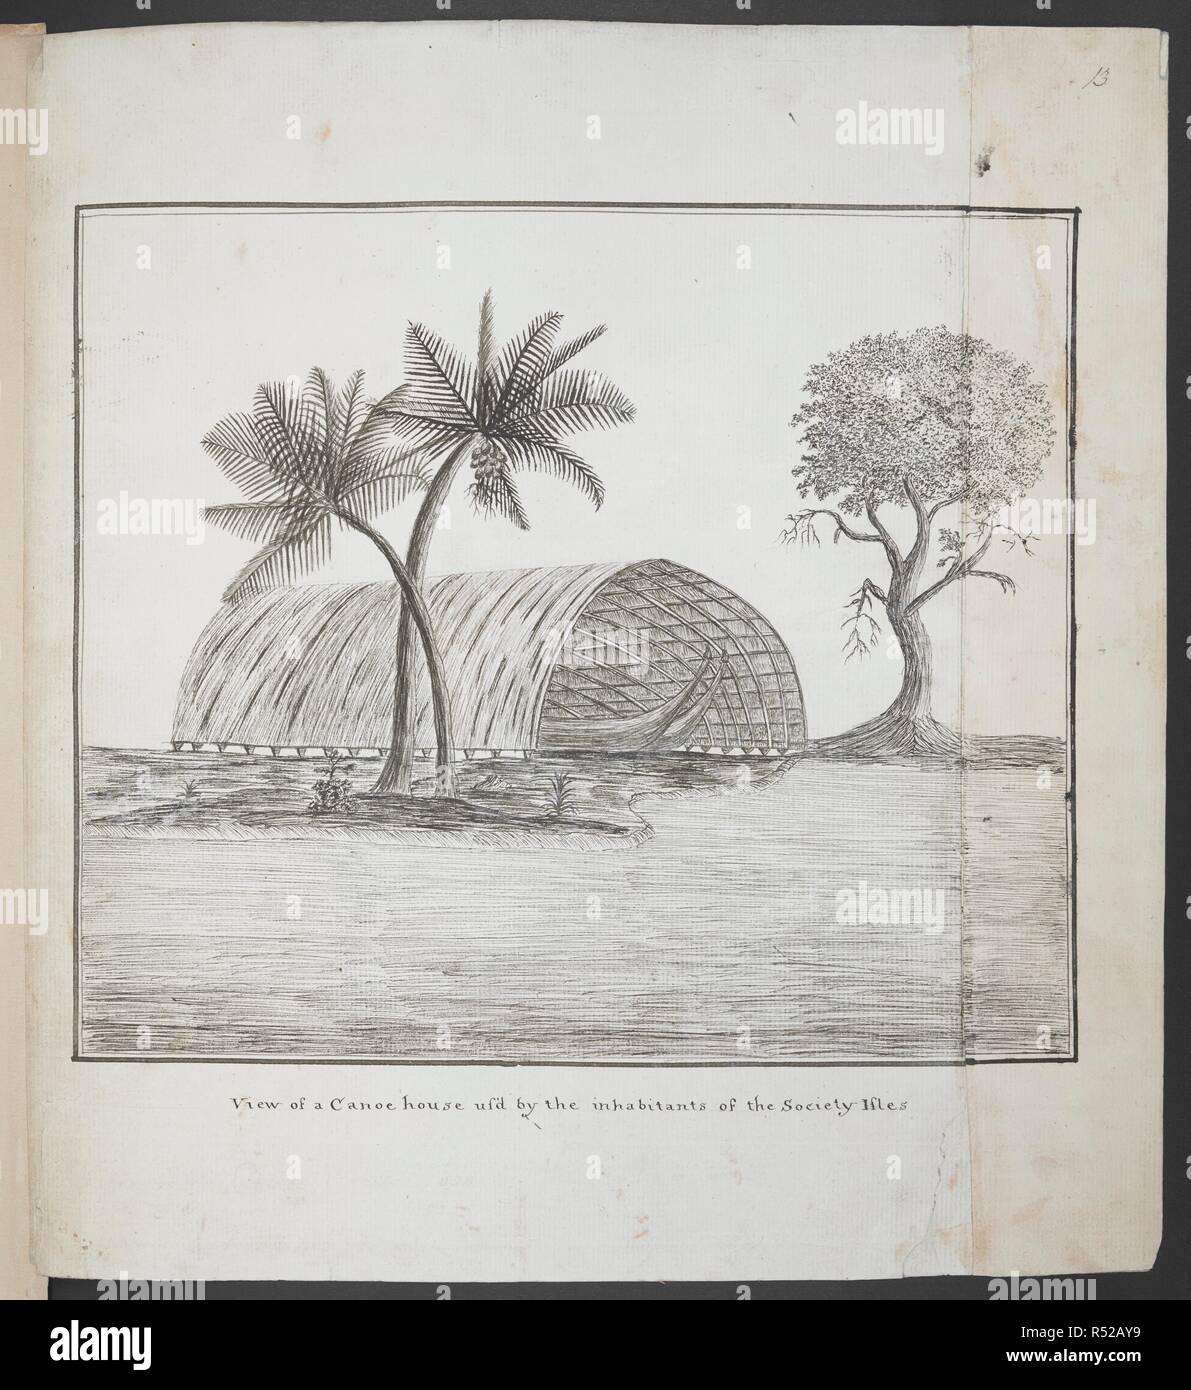 (Whole drawing) View of a canoe house used by the inhabitants of the Society Islands, after a drawing by Sydney Parkinson, January - July 1771. Charts, Plans, Views, and Drawings taken on board the Endeavour during Captain Cook's First Voyage, 1768-1771. 1771. Source: Add. 7085, No.13. Language: English. Author: PRAVAL, CHARLES. Stock Photo